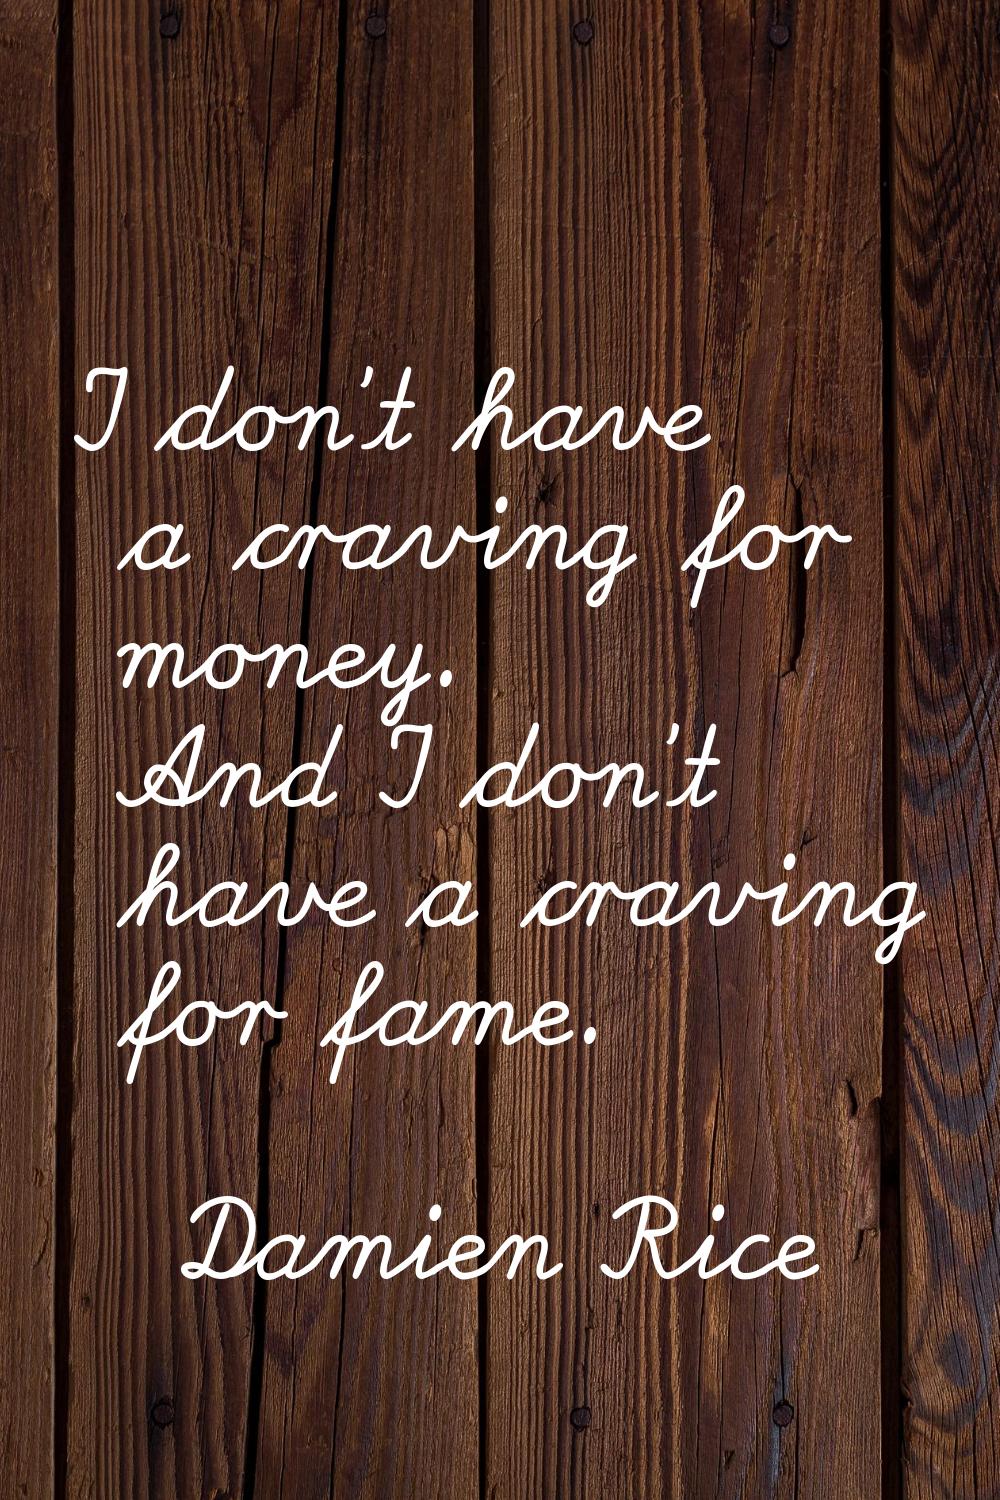 I don't have a craving for money. And I don't have a craving for fame.